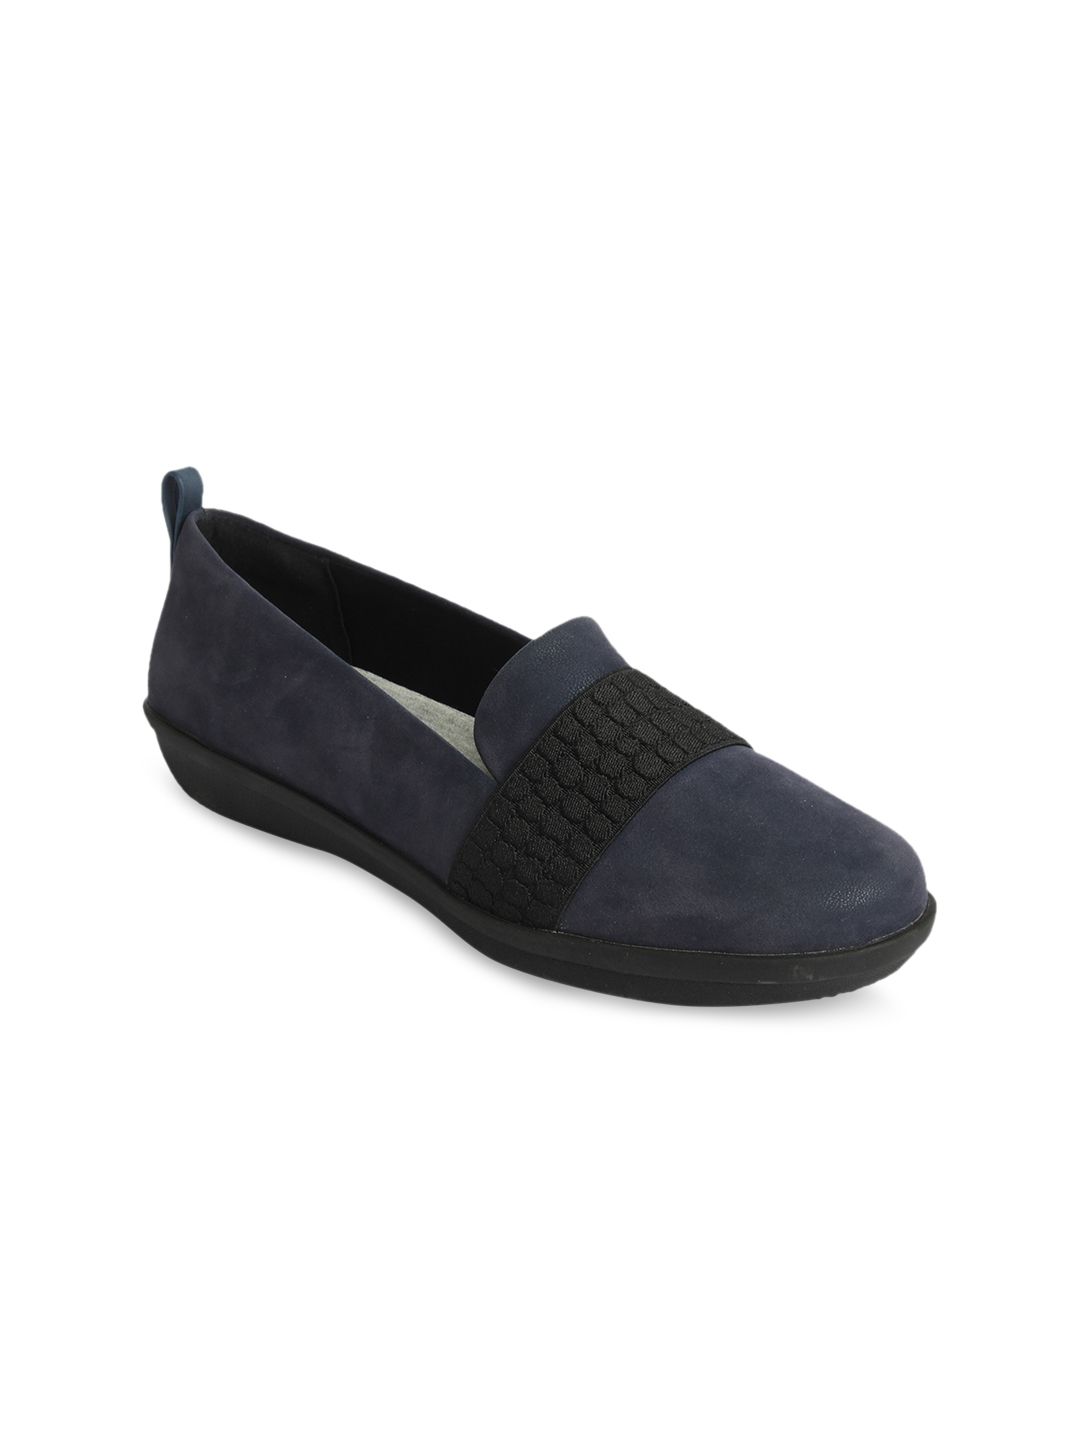 Clarks Women Navy Blue & Black Solid Loafers Price in India